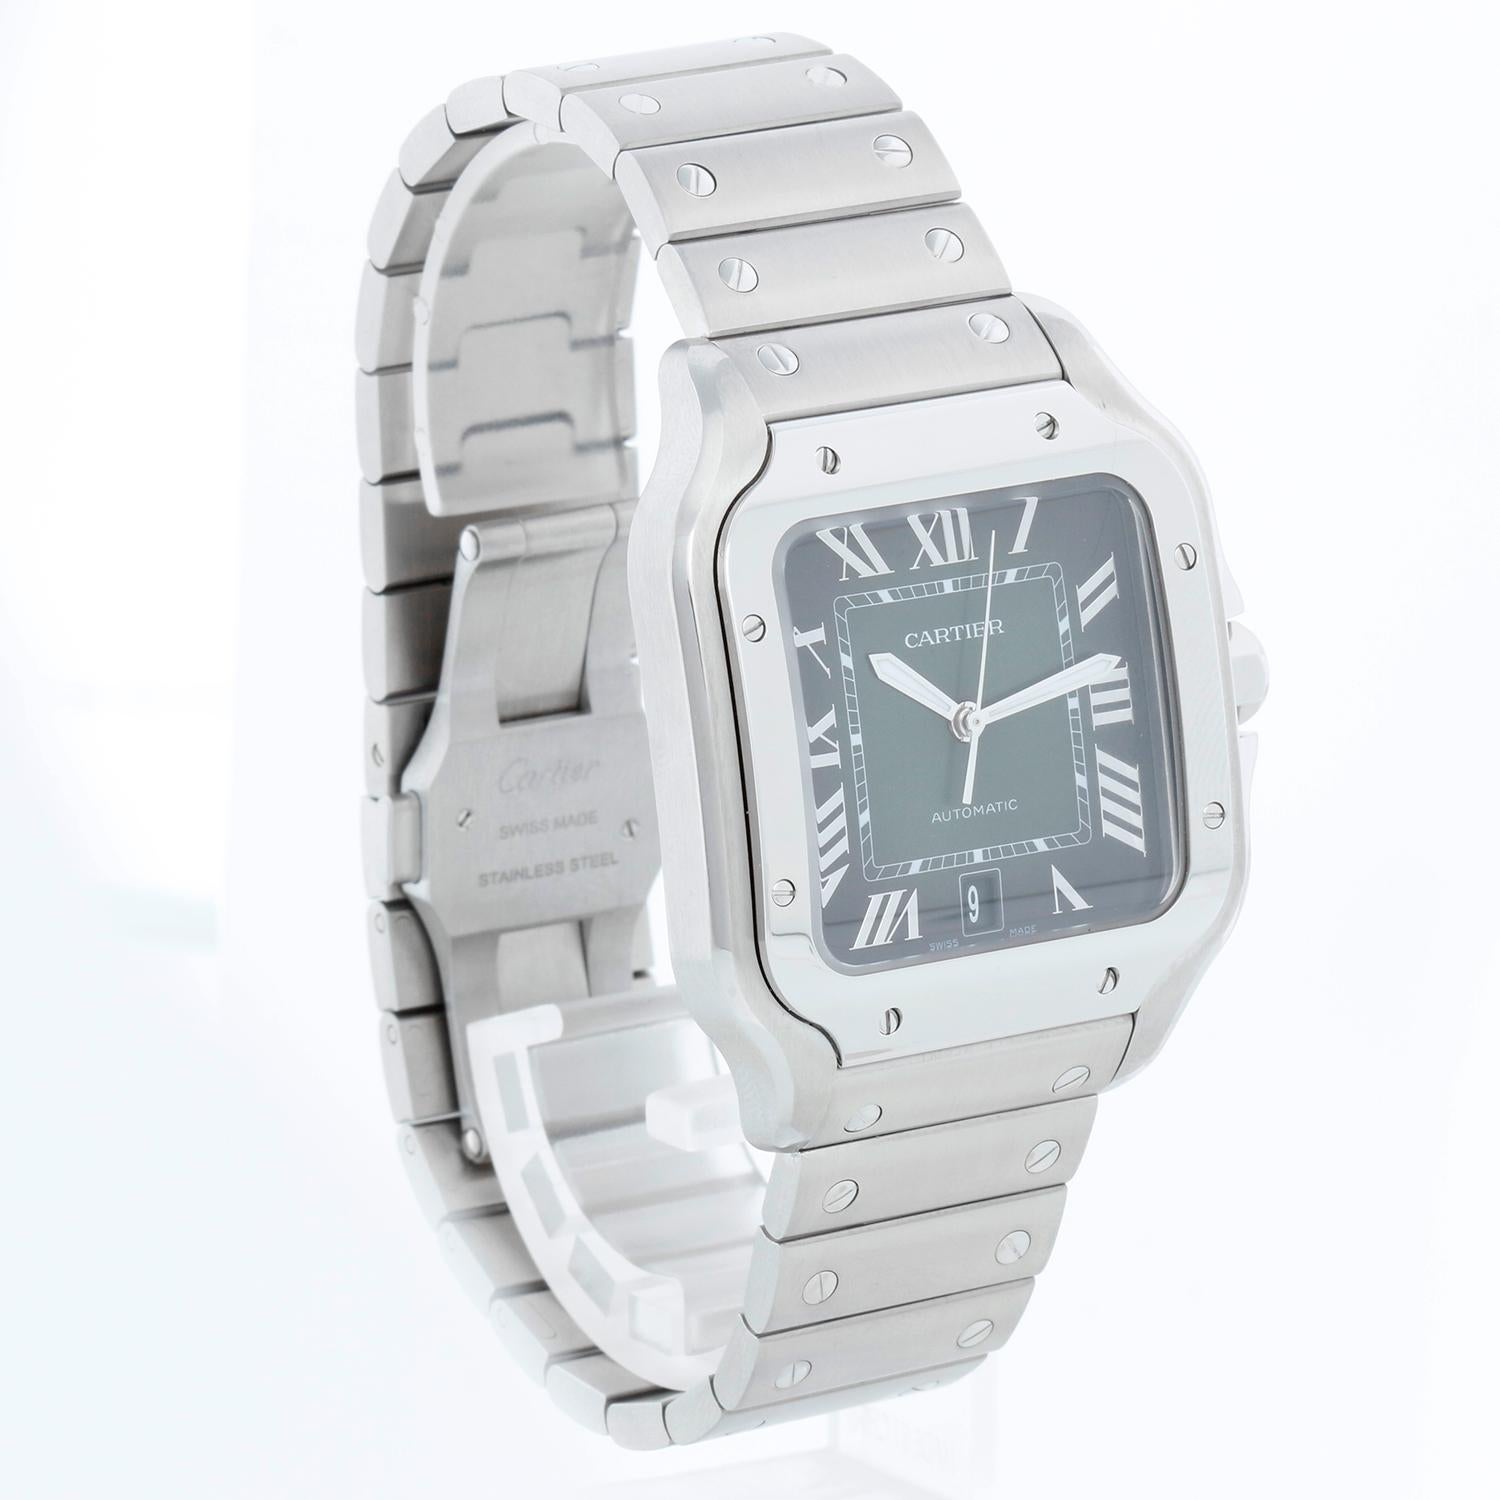 Cartier Santos De Cartier Stainless Steel Large Watch WSSA0062 In New Condition For Sale In Dallas, TX